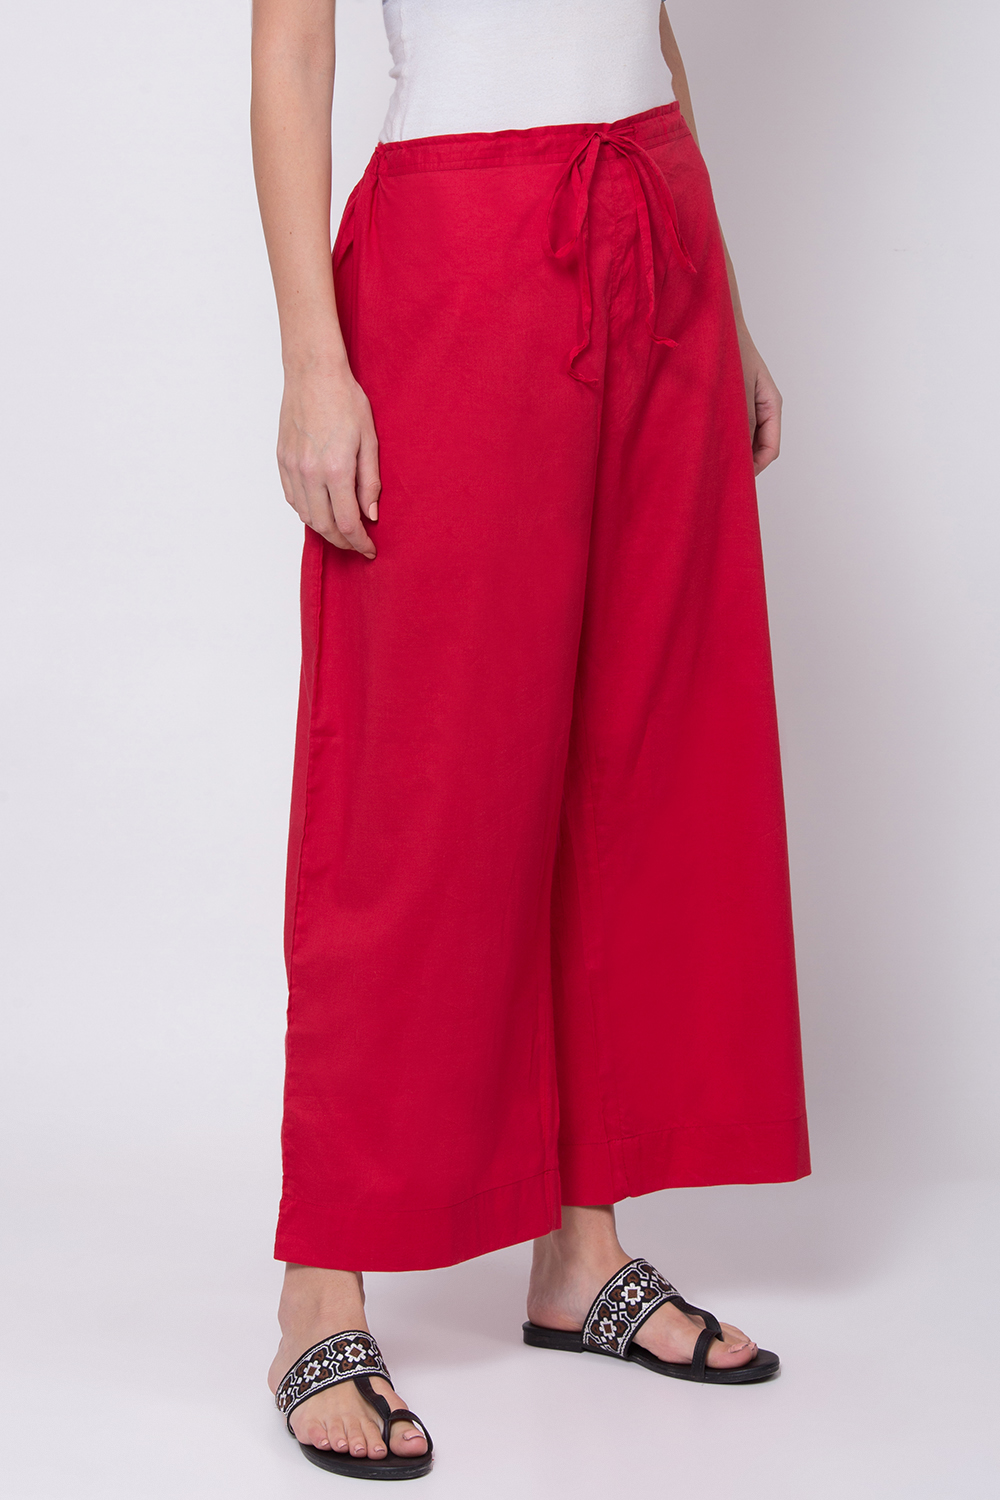 Buy Red Cotton Palazzo () for N/A0.0